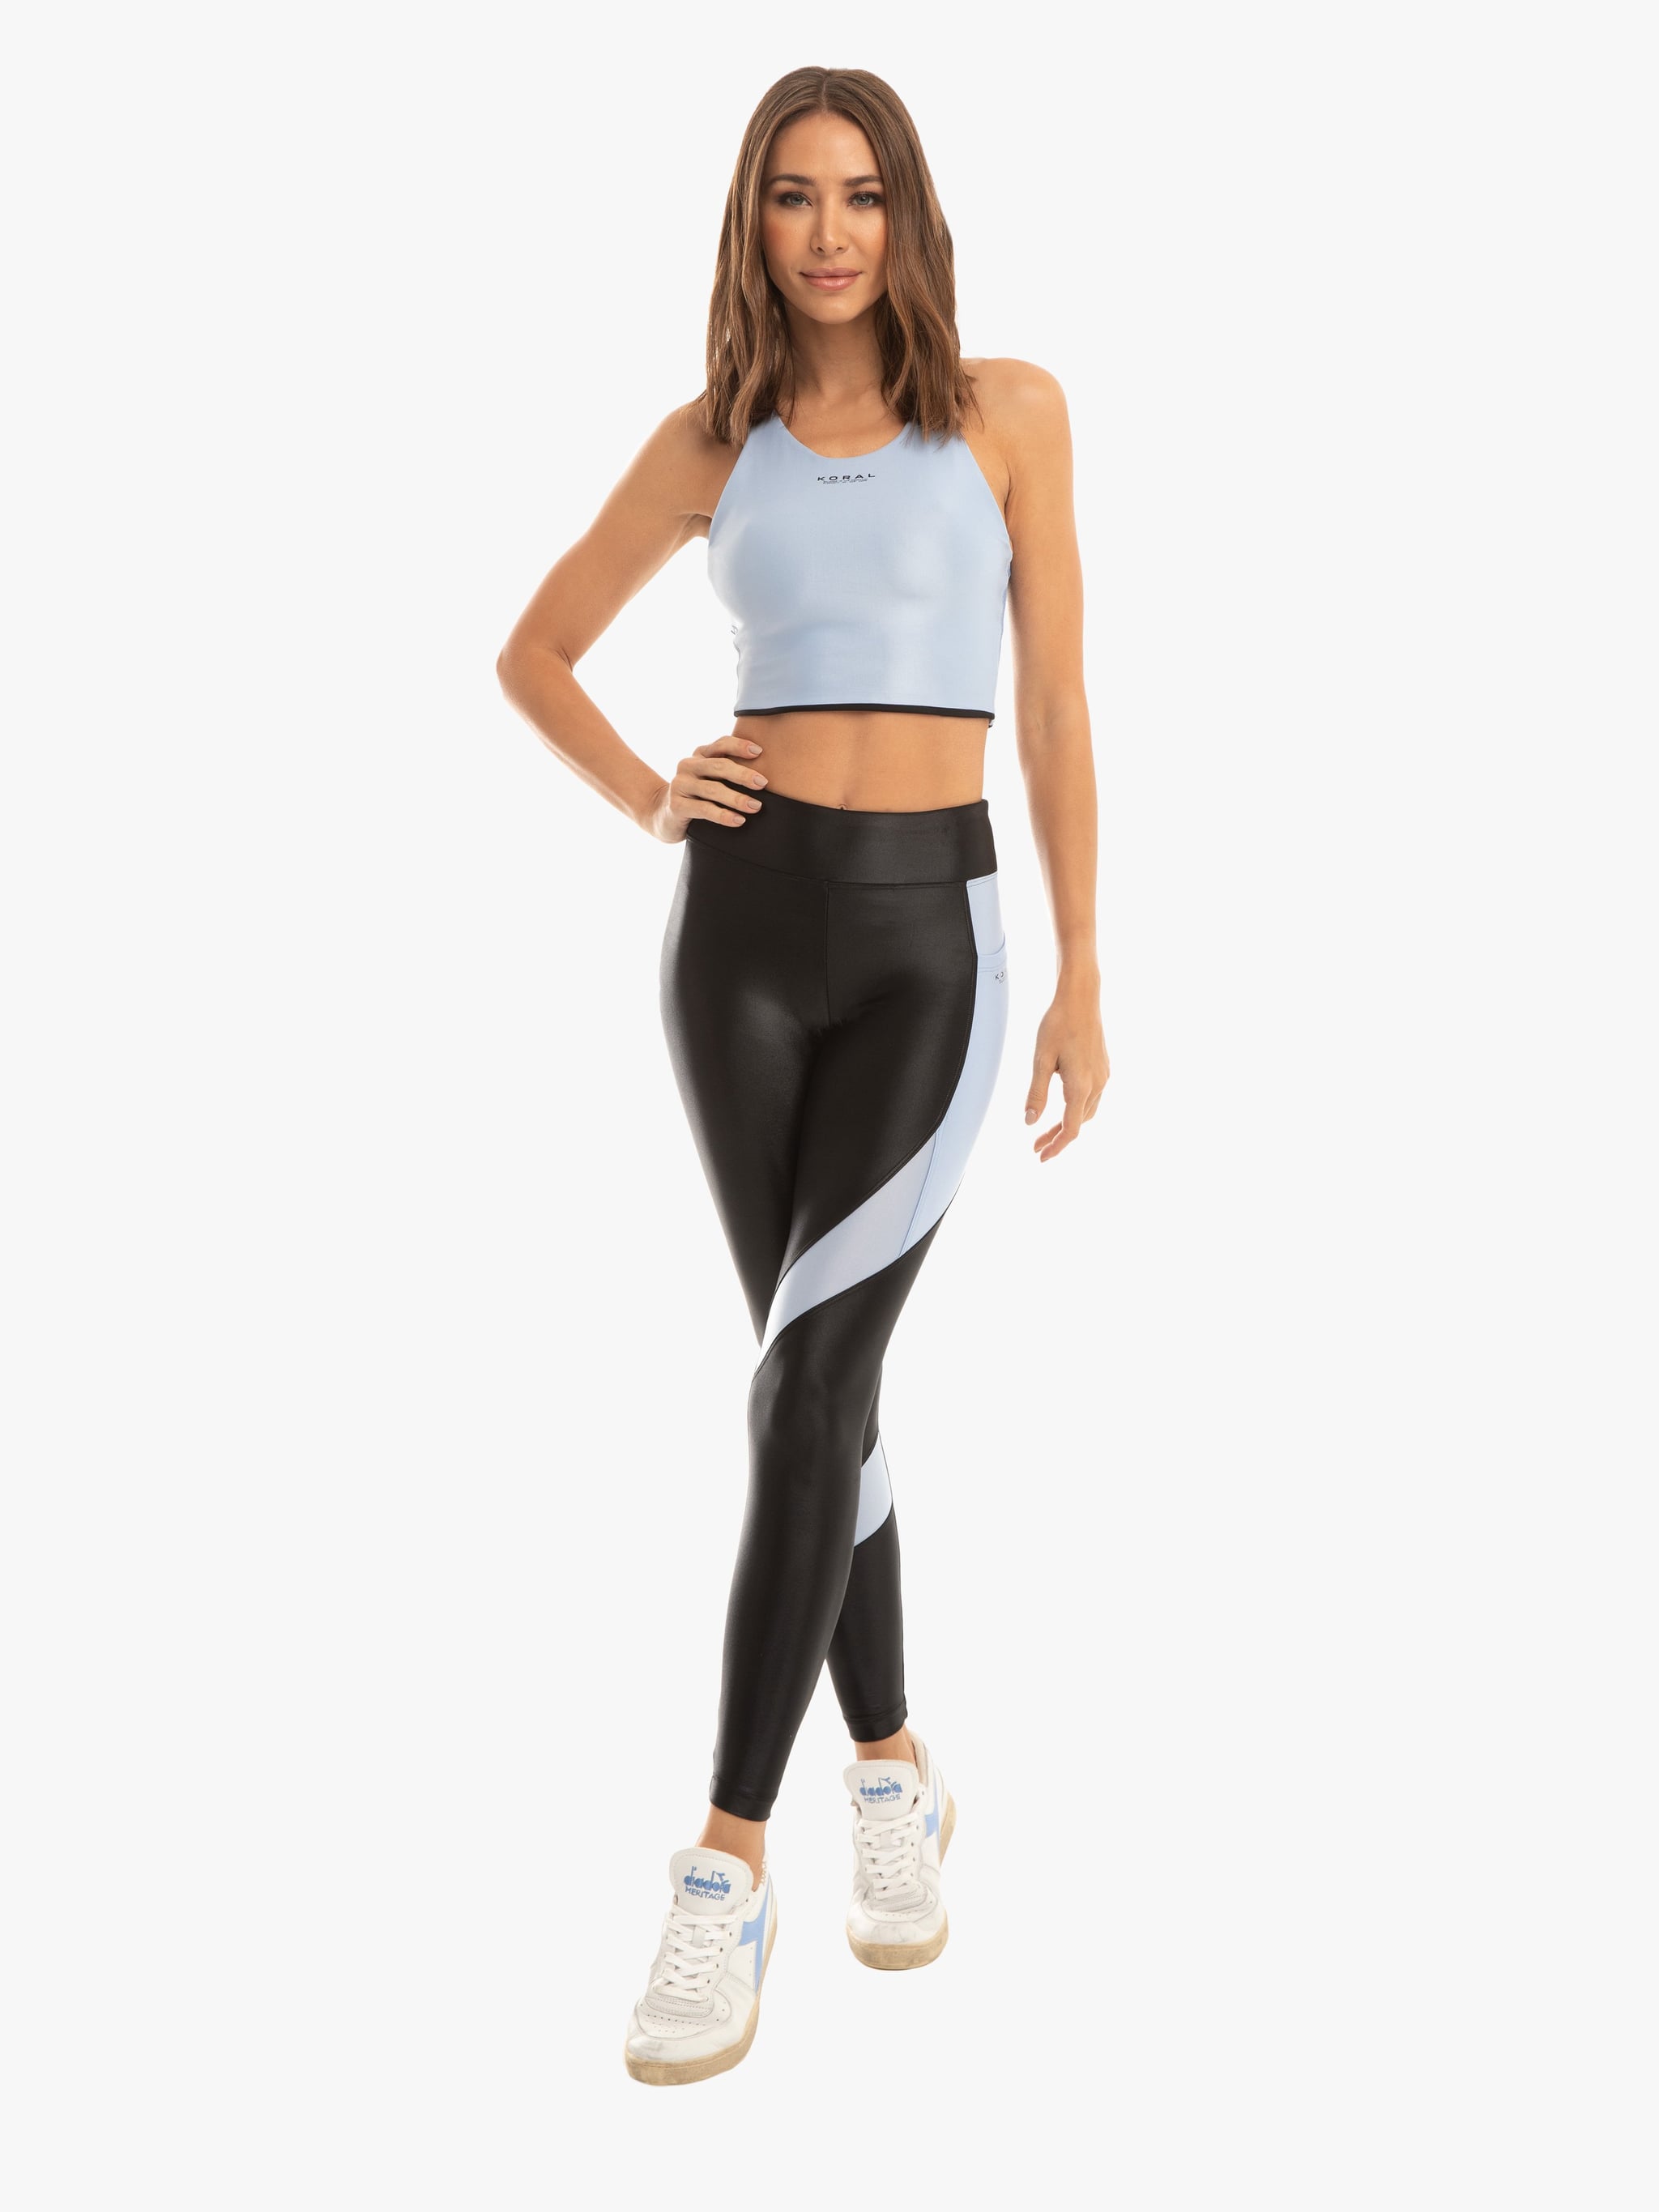 The Best Koral Workout Clothes For Women